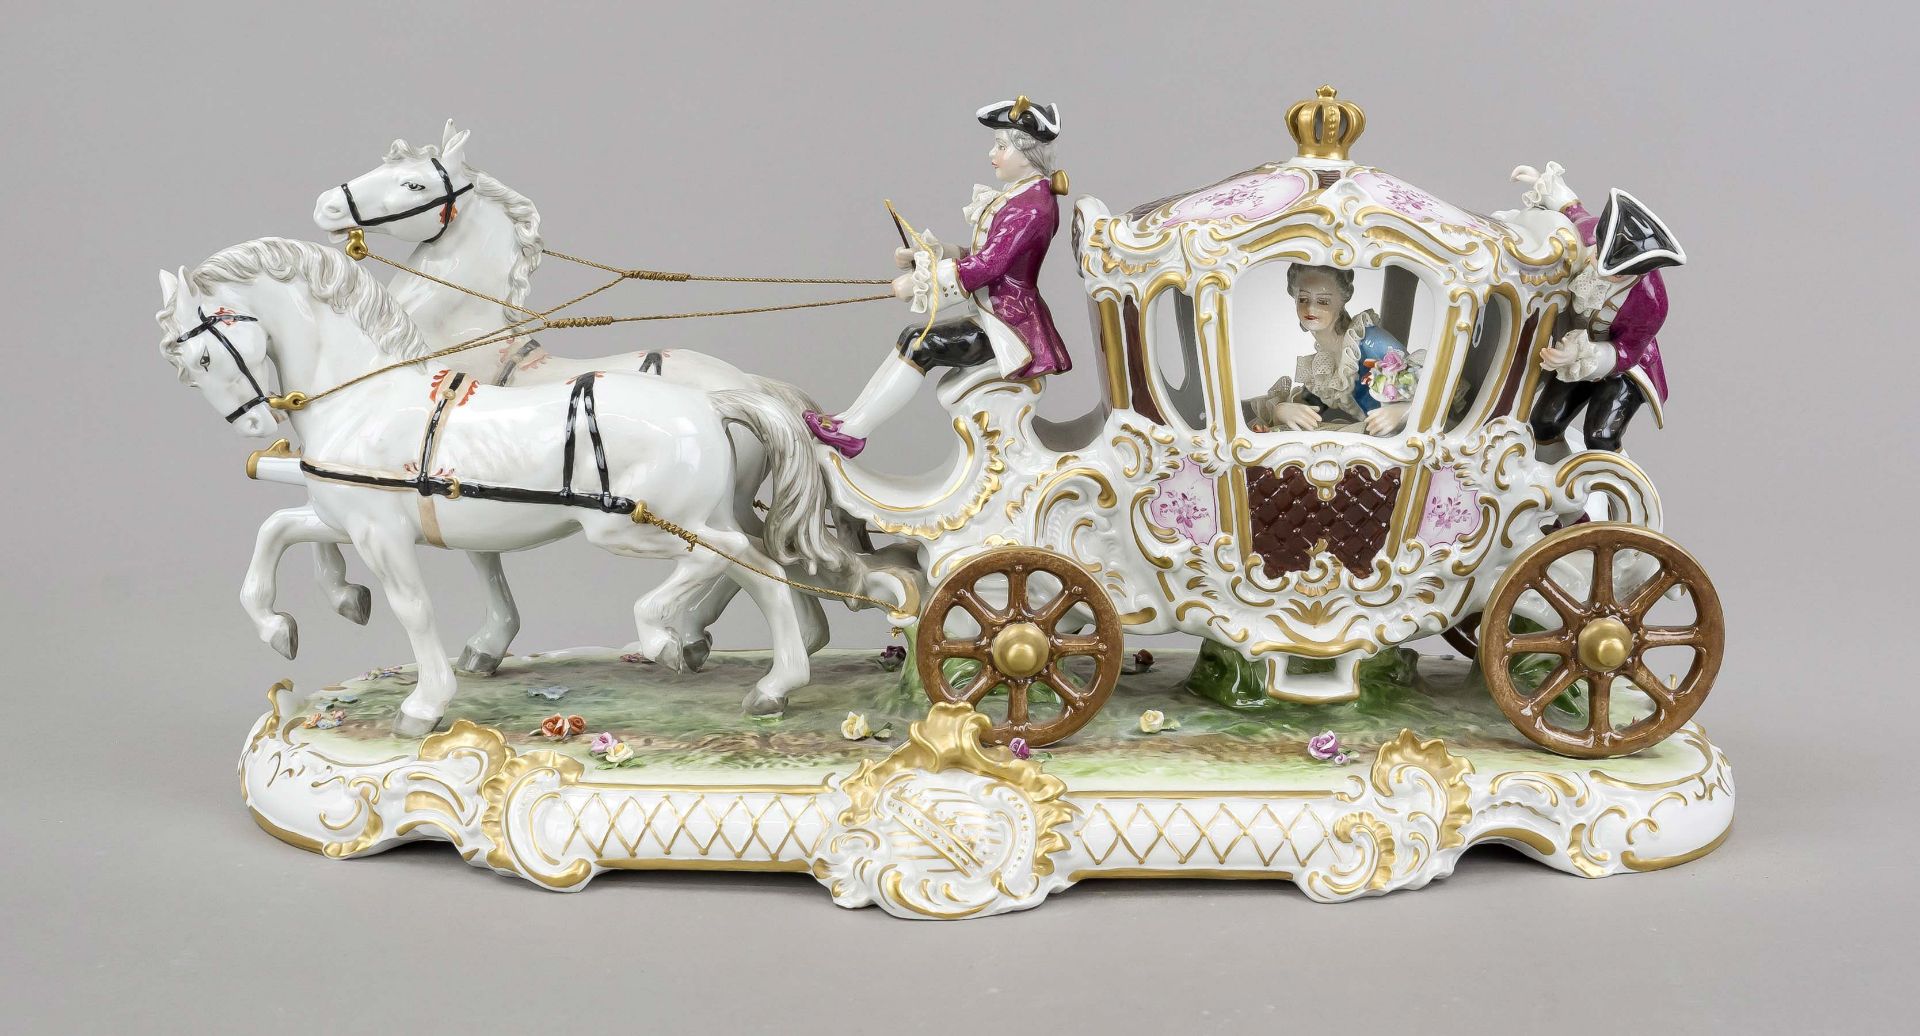 Large carriage with two horses, Unterweißbach, Thuringia, 20th century, elegant lady in rococo dress